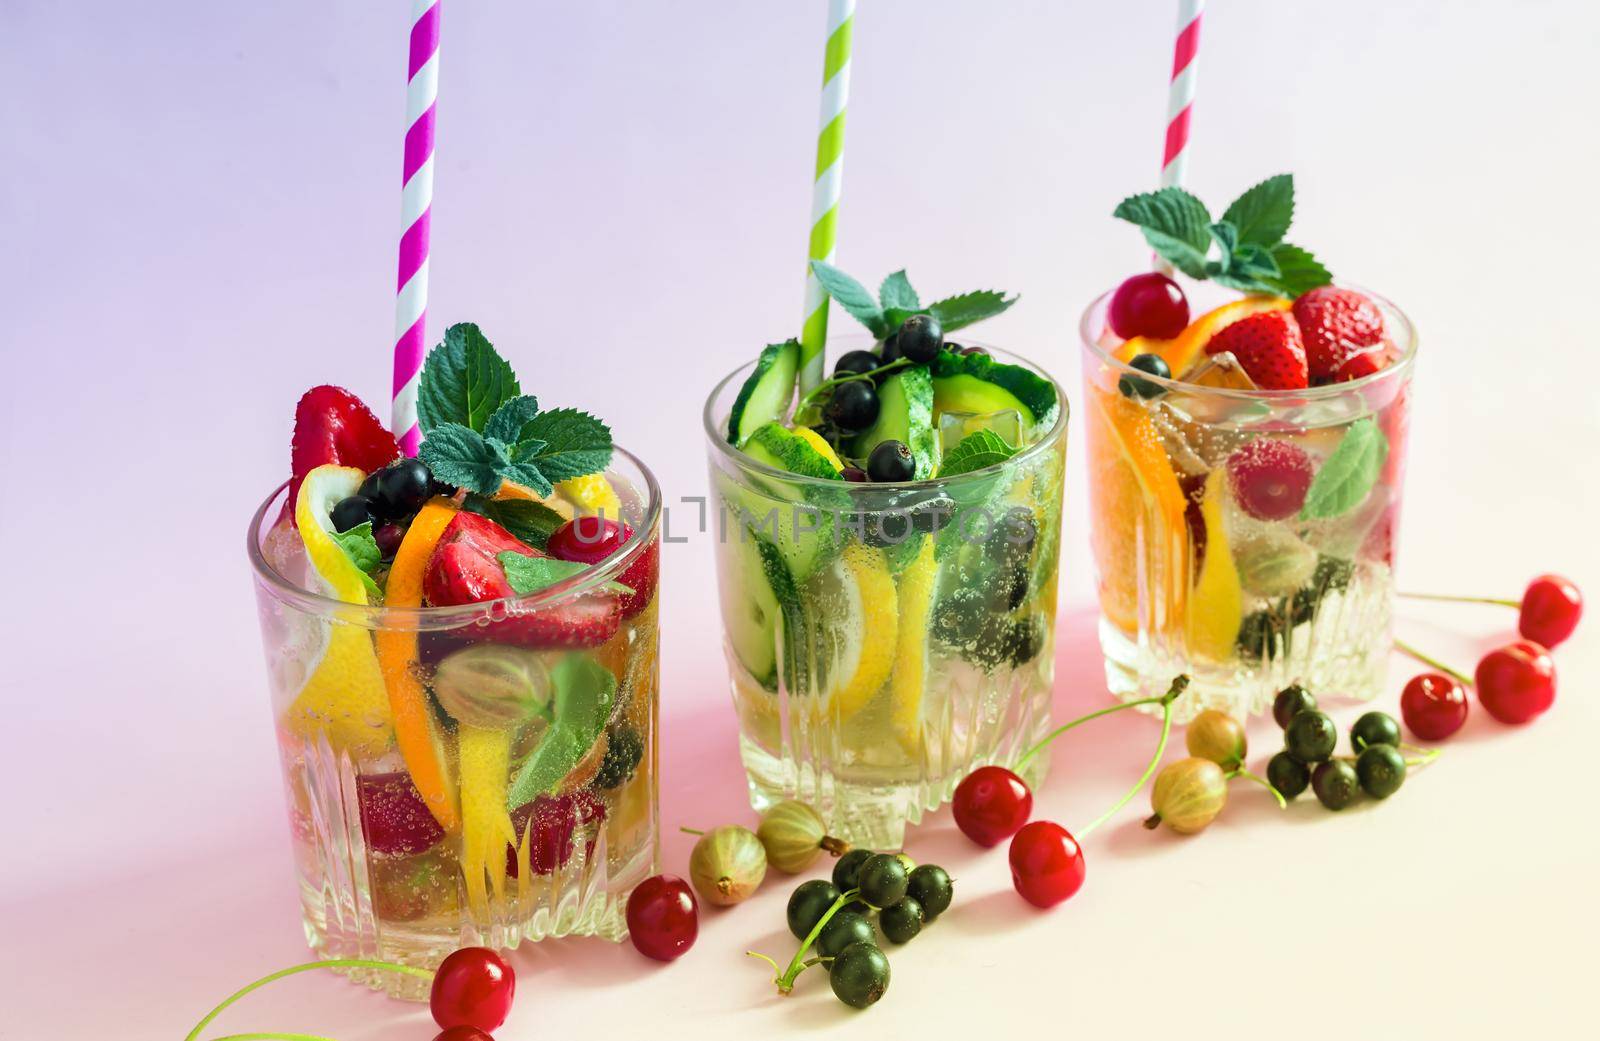 Summer refreshing cocktail of natural fruits and various berries with ice and mint leaves infused with water. Contains lemon, orange, strawberry, cherry, currant.